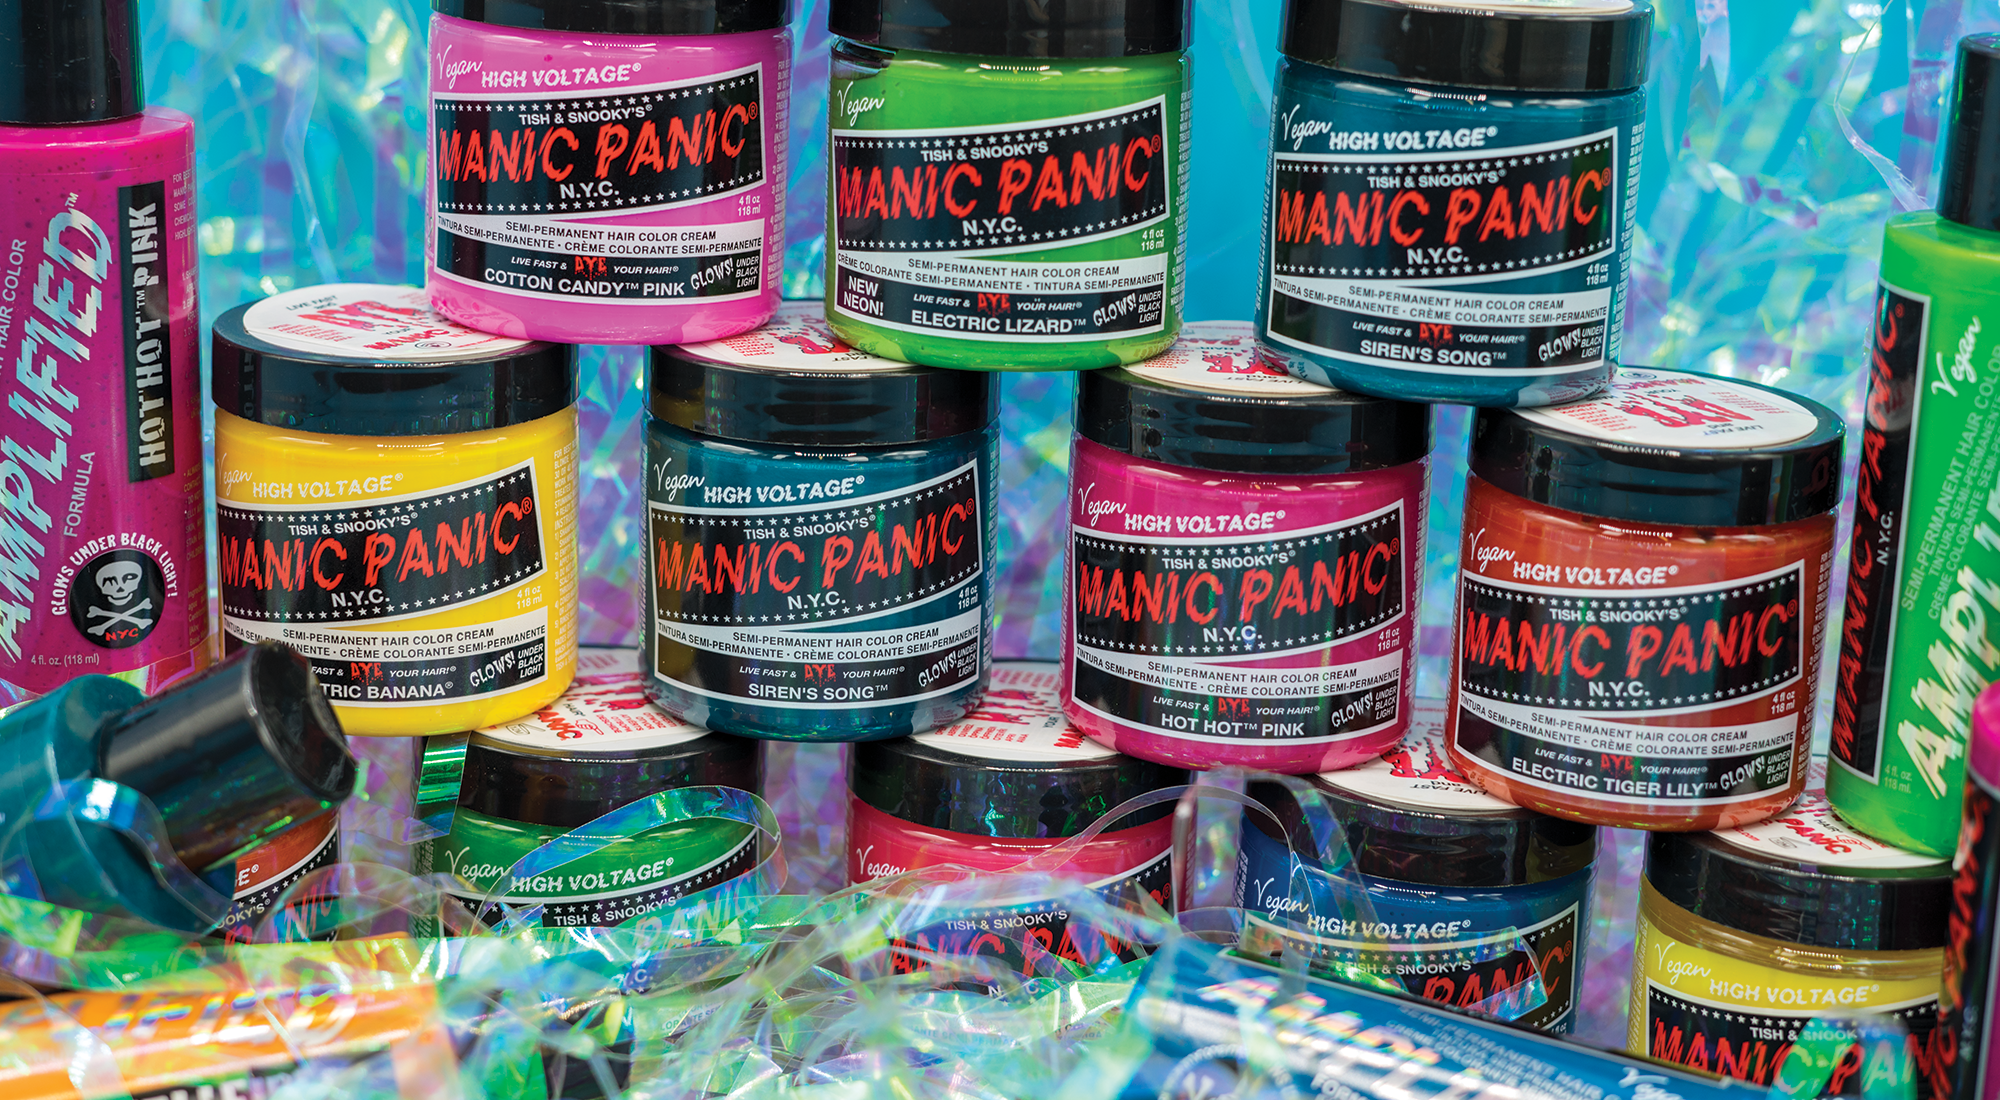 Assorted Manic Panic products